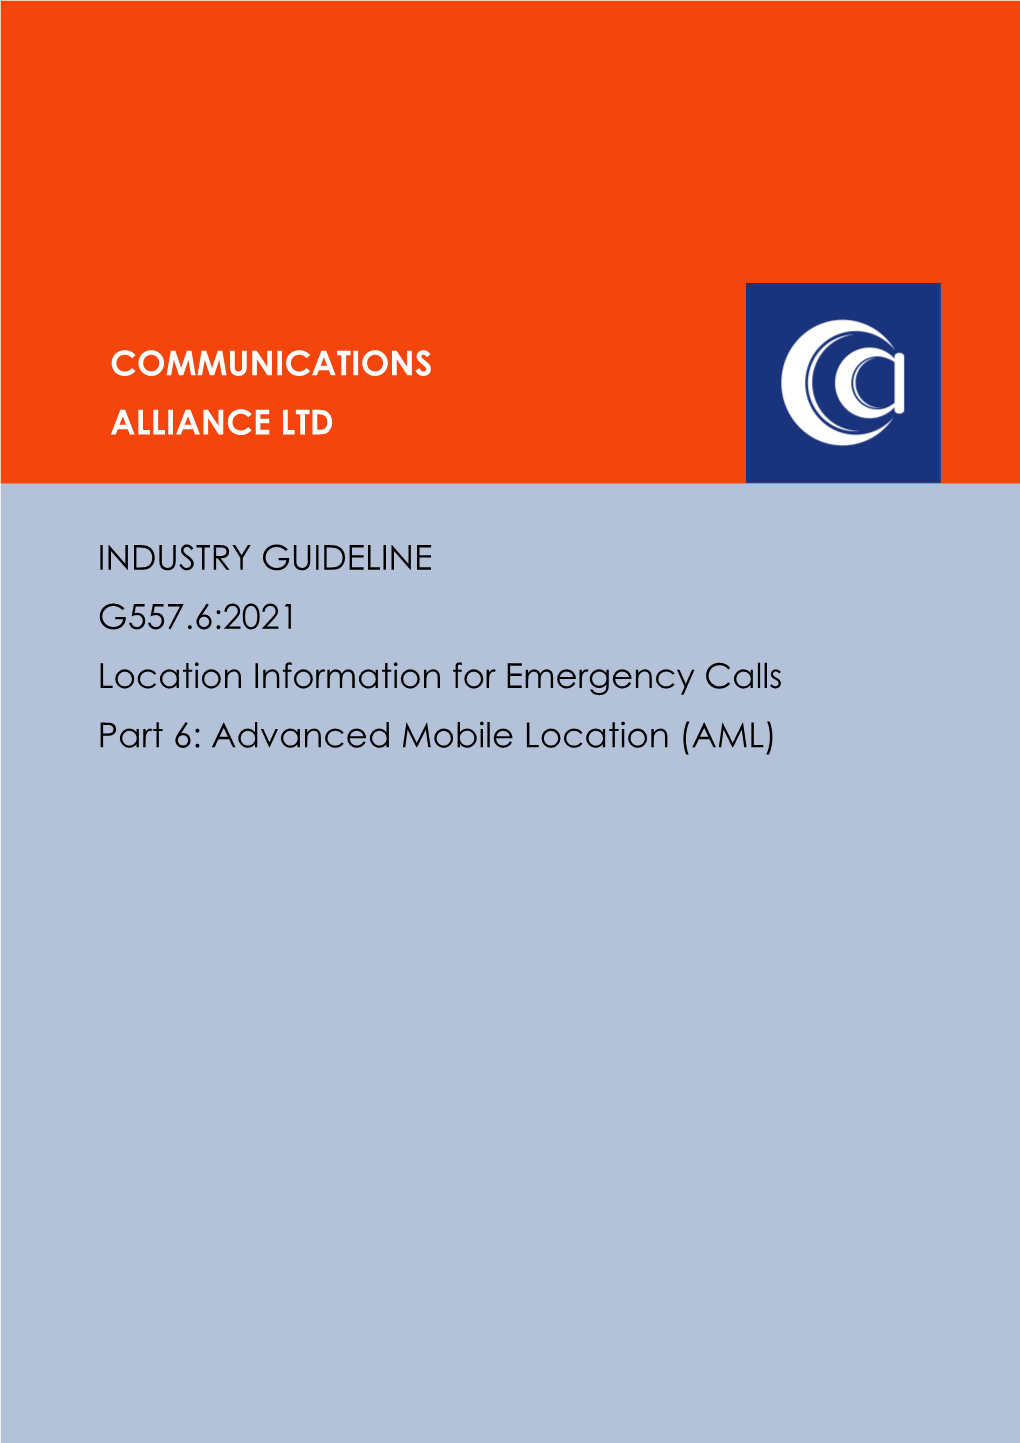 INDUSTRY GUIDELINE G557.6:2021 Location Information for Emergency Calls Part 6: Advanced Mobile Location (AML)